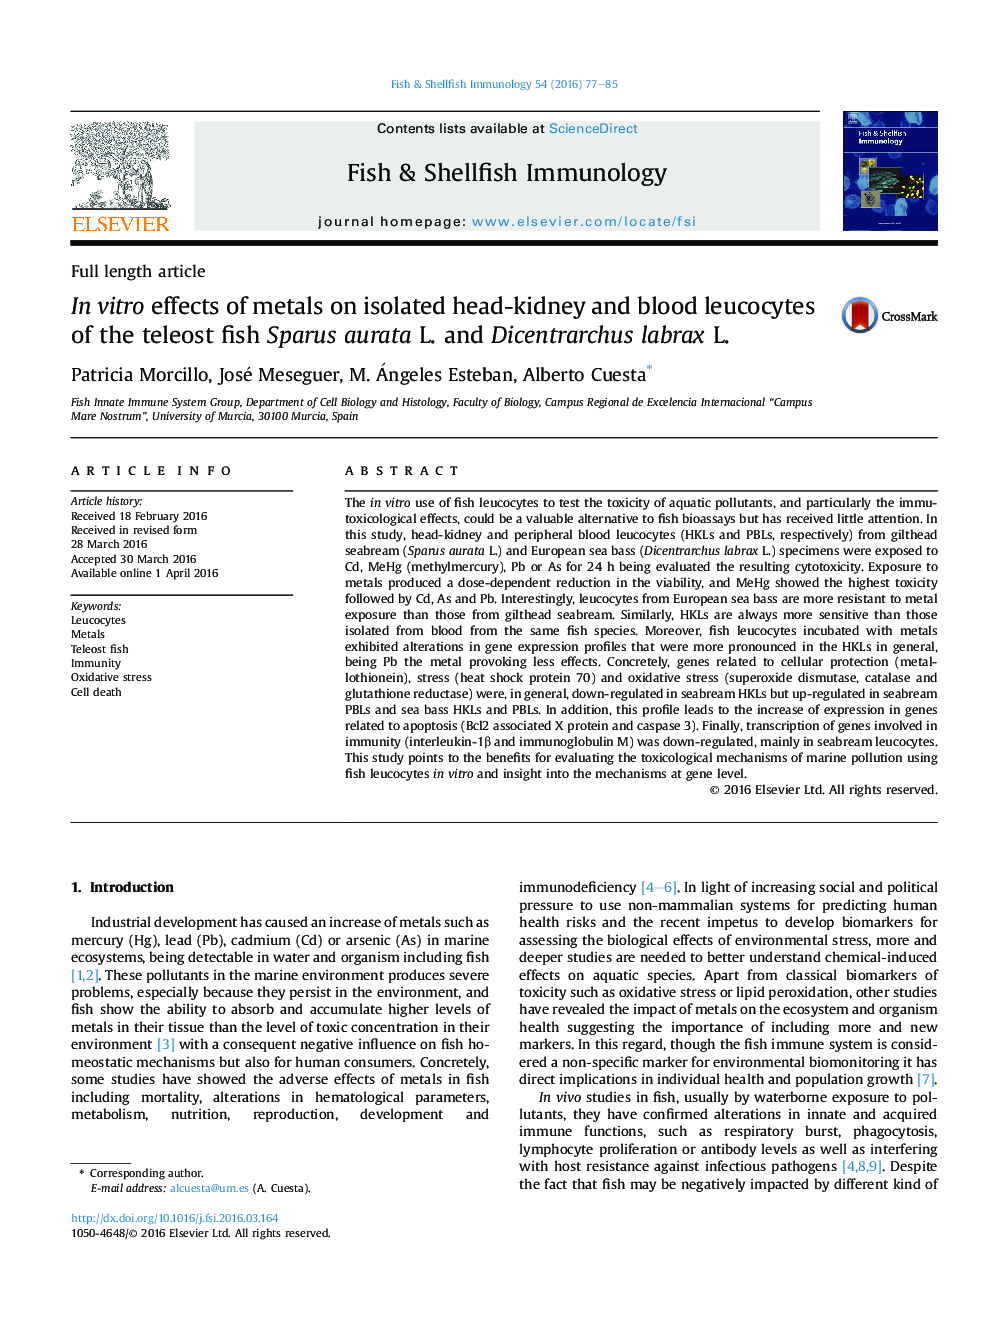 In vitro effects of metals on isolated head-kidney and blood leucocytes of the teleost fish Sparus aurata L. and Dicentrarchus labrax L.